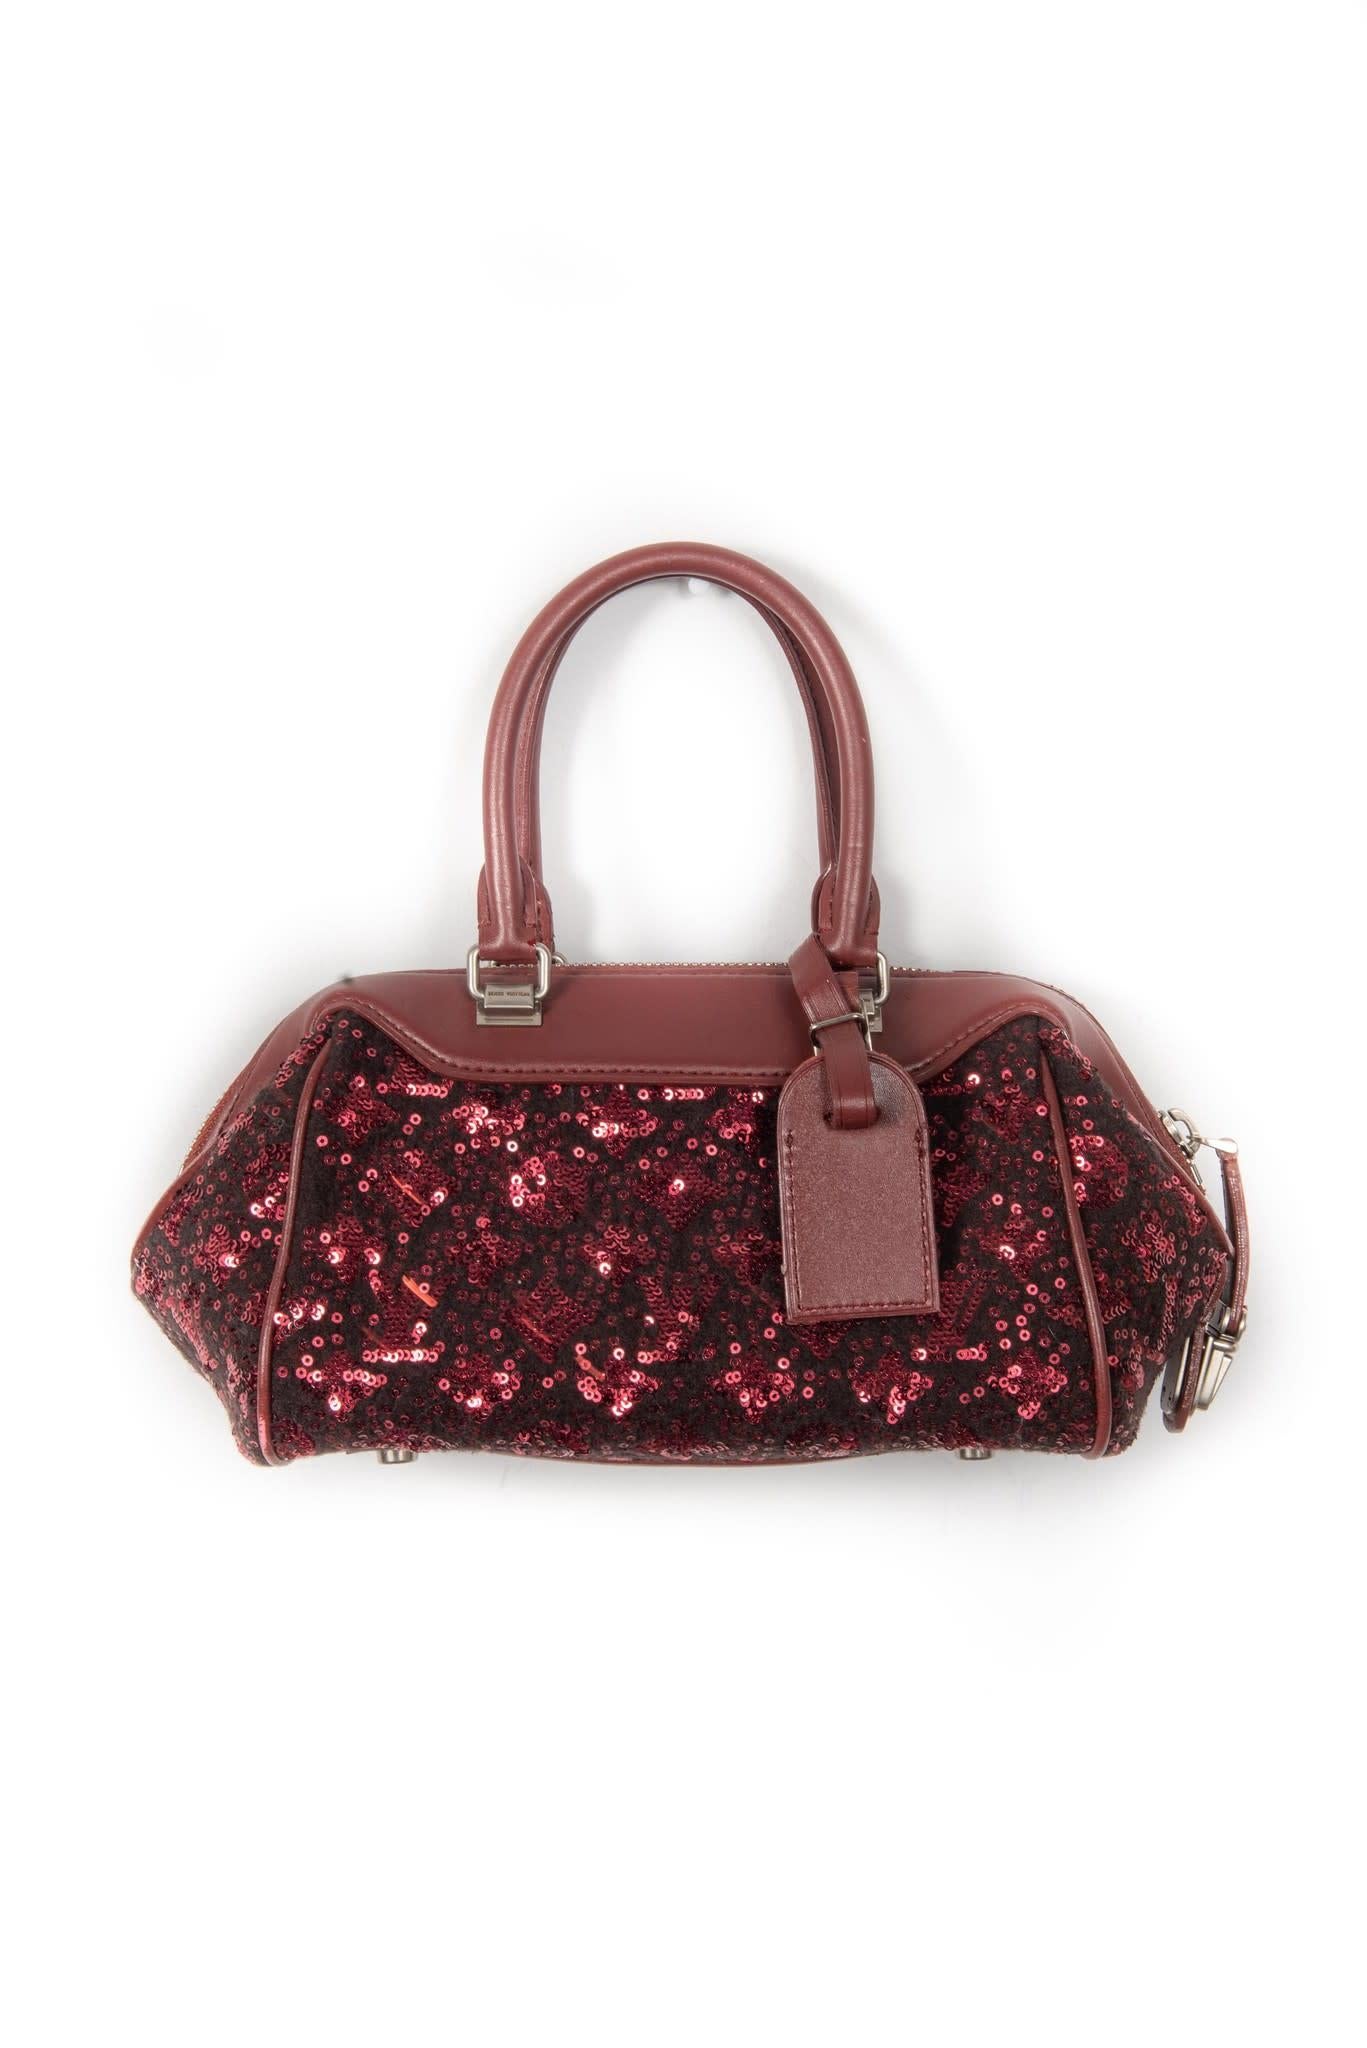 Made from wool with sequin-embroidery in the monogram pattern with dark red leather finishes. Limited edition bag features silver tone hardware, leather finishes, 2 rolled leather top handles, top zip closure and woven fabric interior lining. 